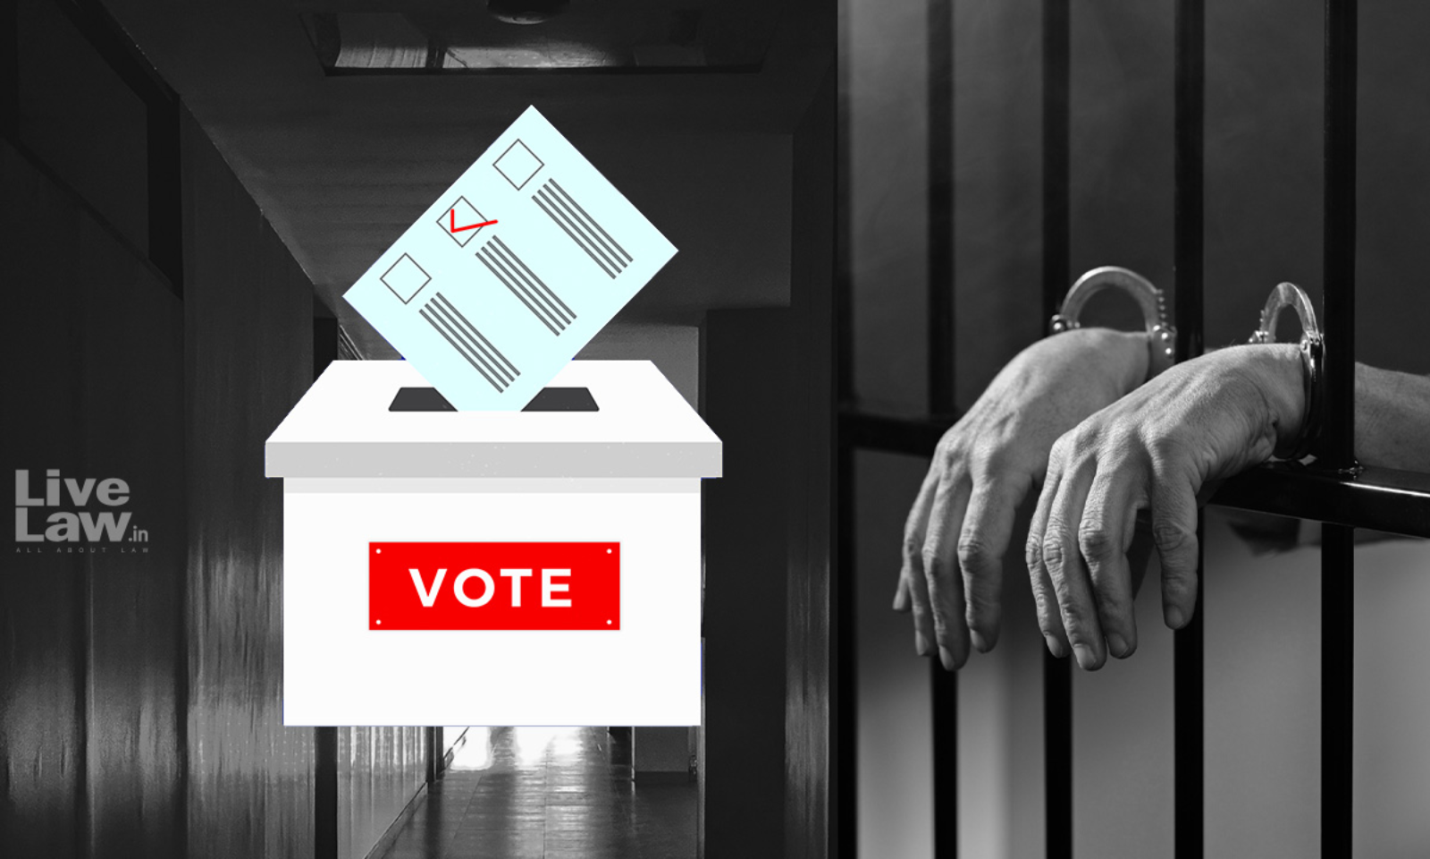 WHY CAN ACCUSED PERSONS IN PRISON CONTEST POLLS BUT NOT VOTE?